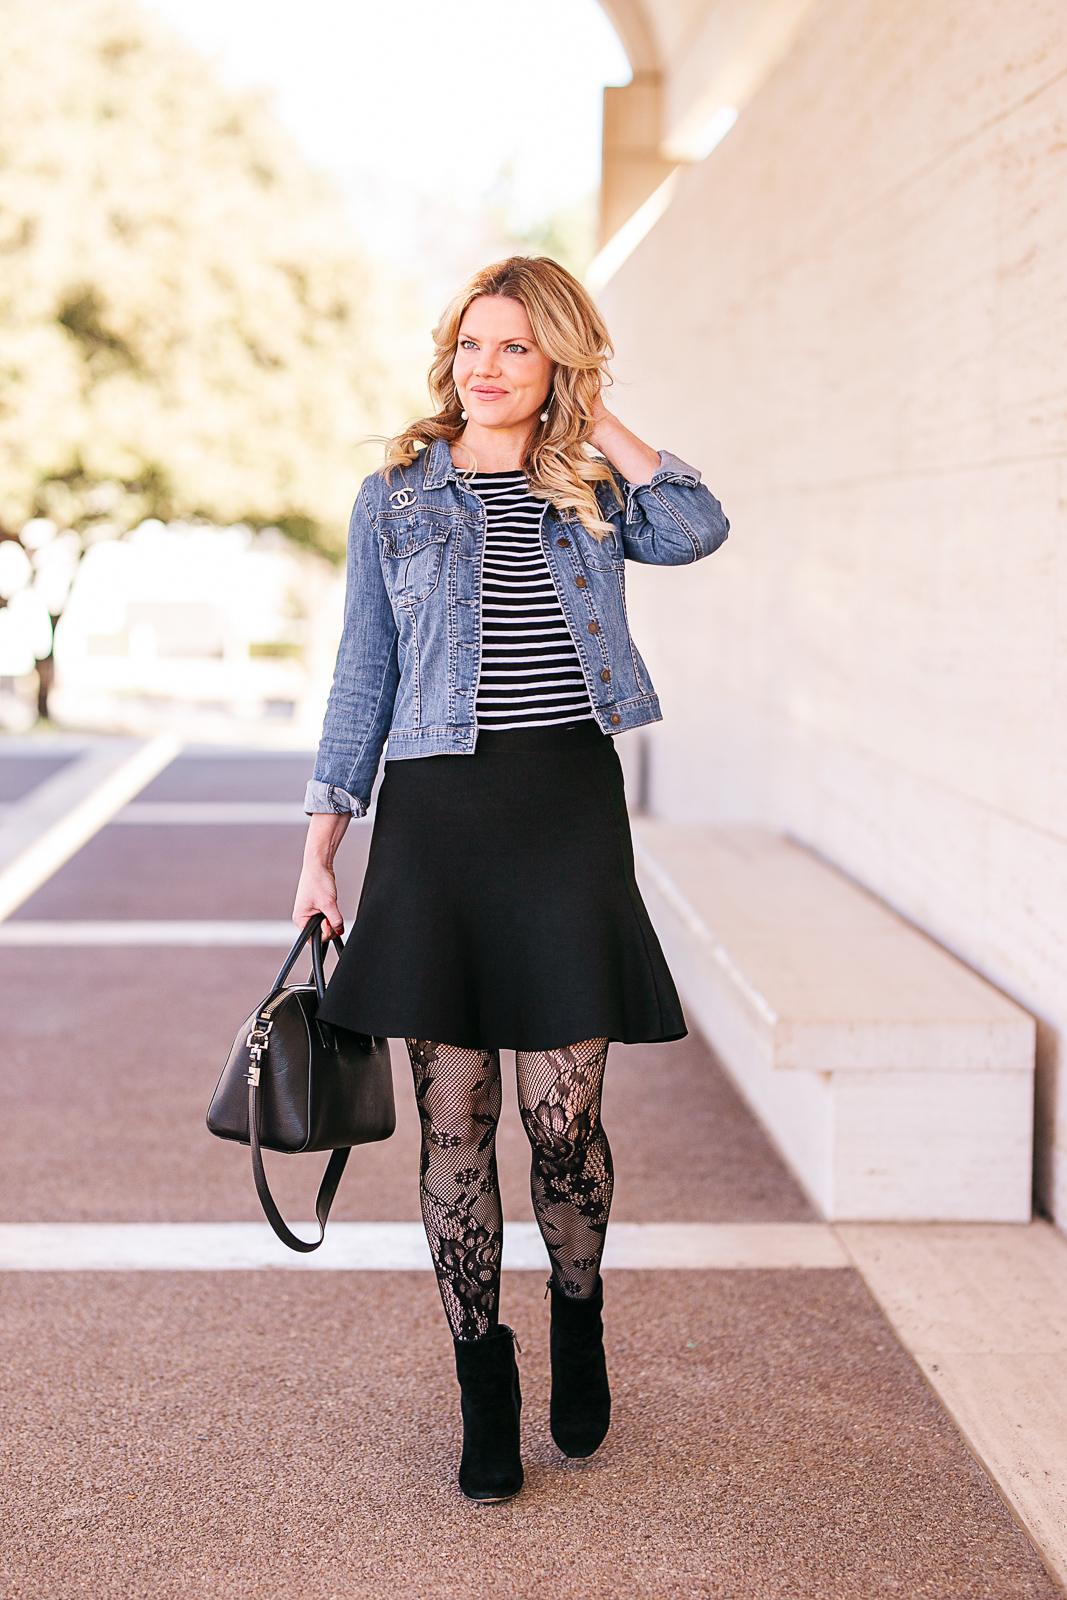 Graphic Printed Tights Styling Tips